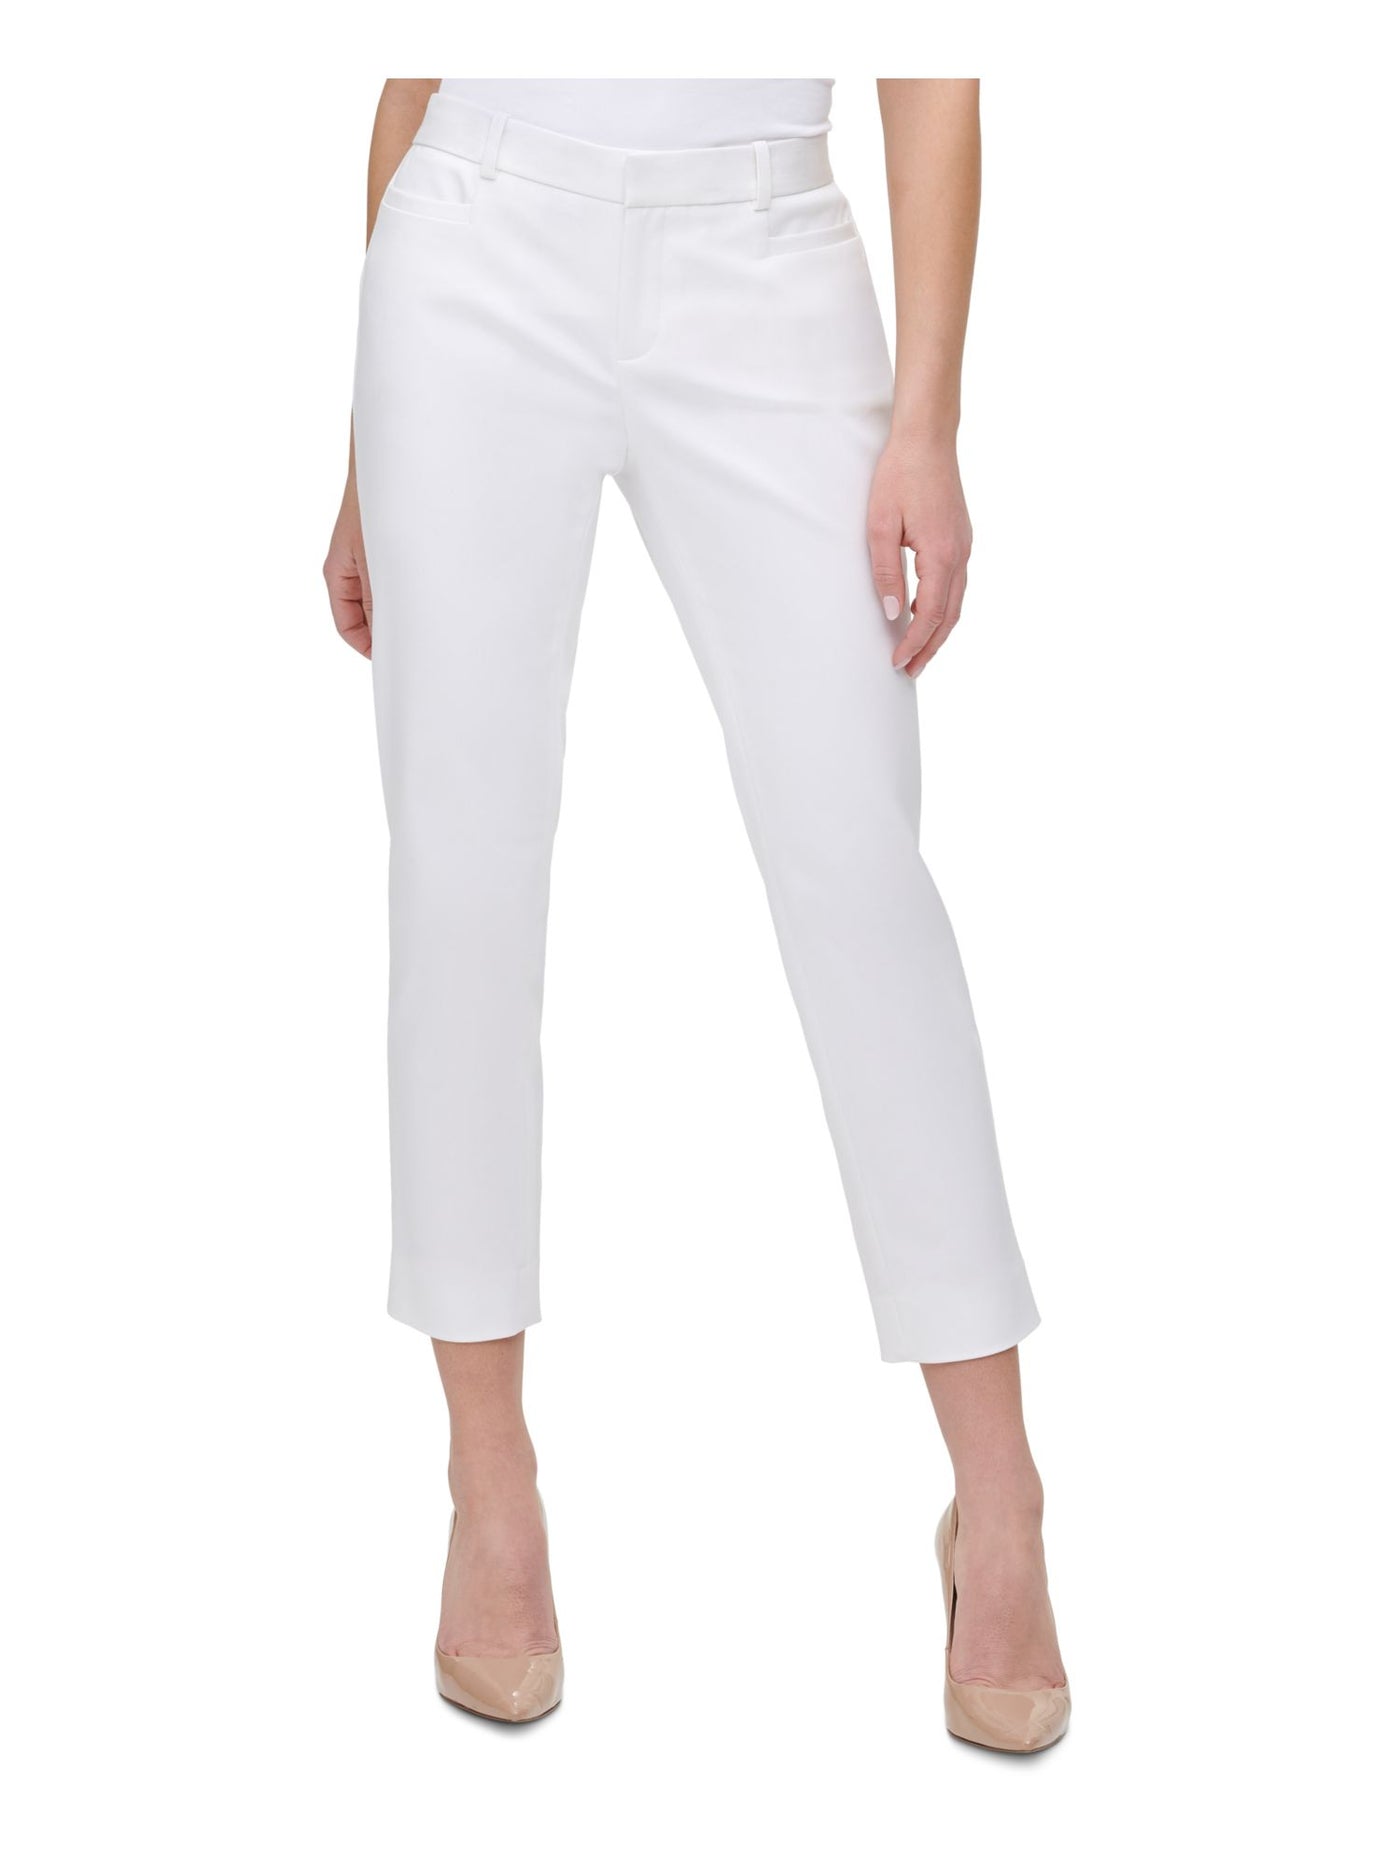 TOMMY HILFIGER Womens Ivory Zippered Pocketed Cropped Skinny Pants 16